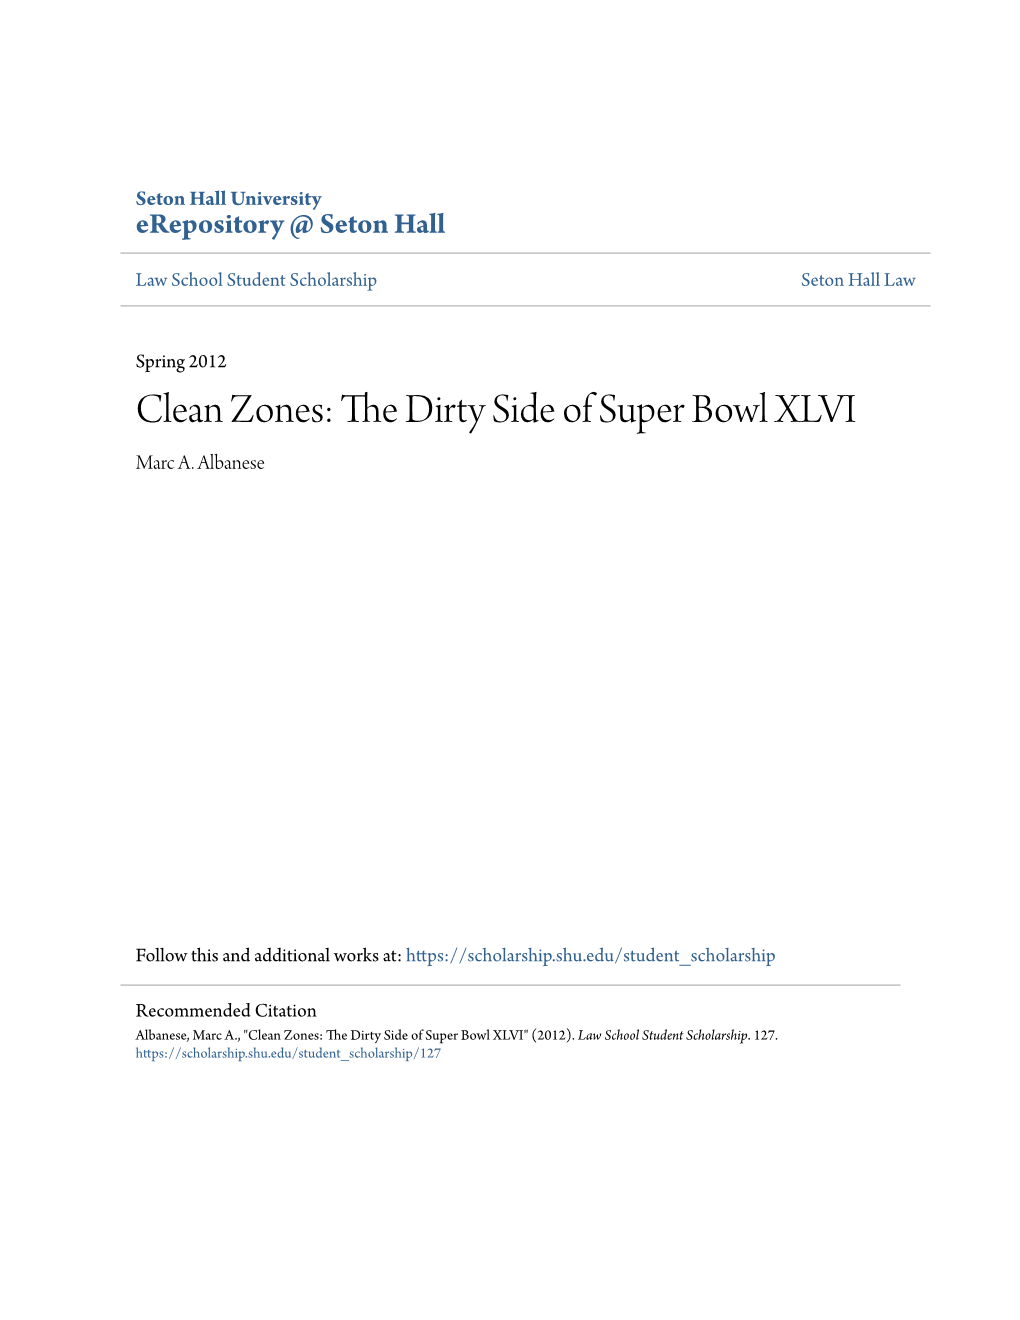 Clean Zones: the Dirty Side of Super Bowl XLVI Marc A